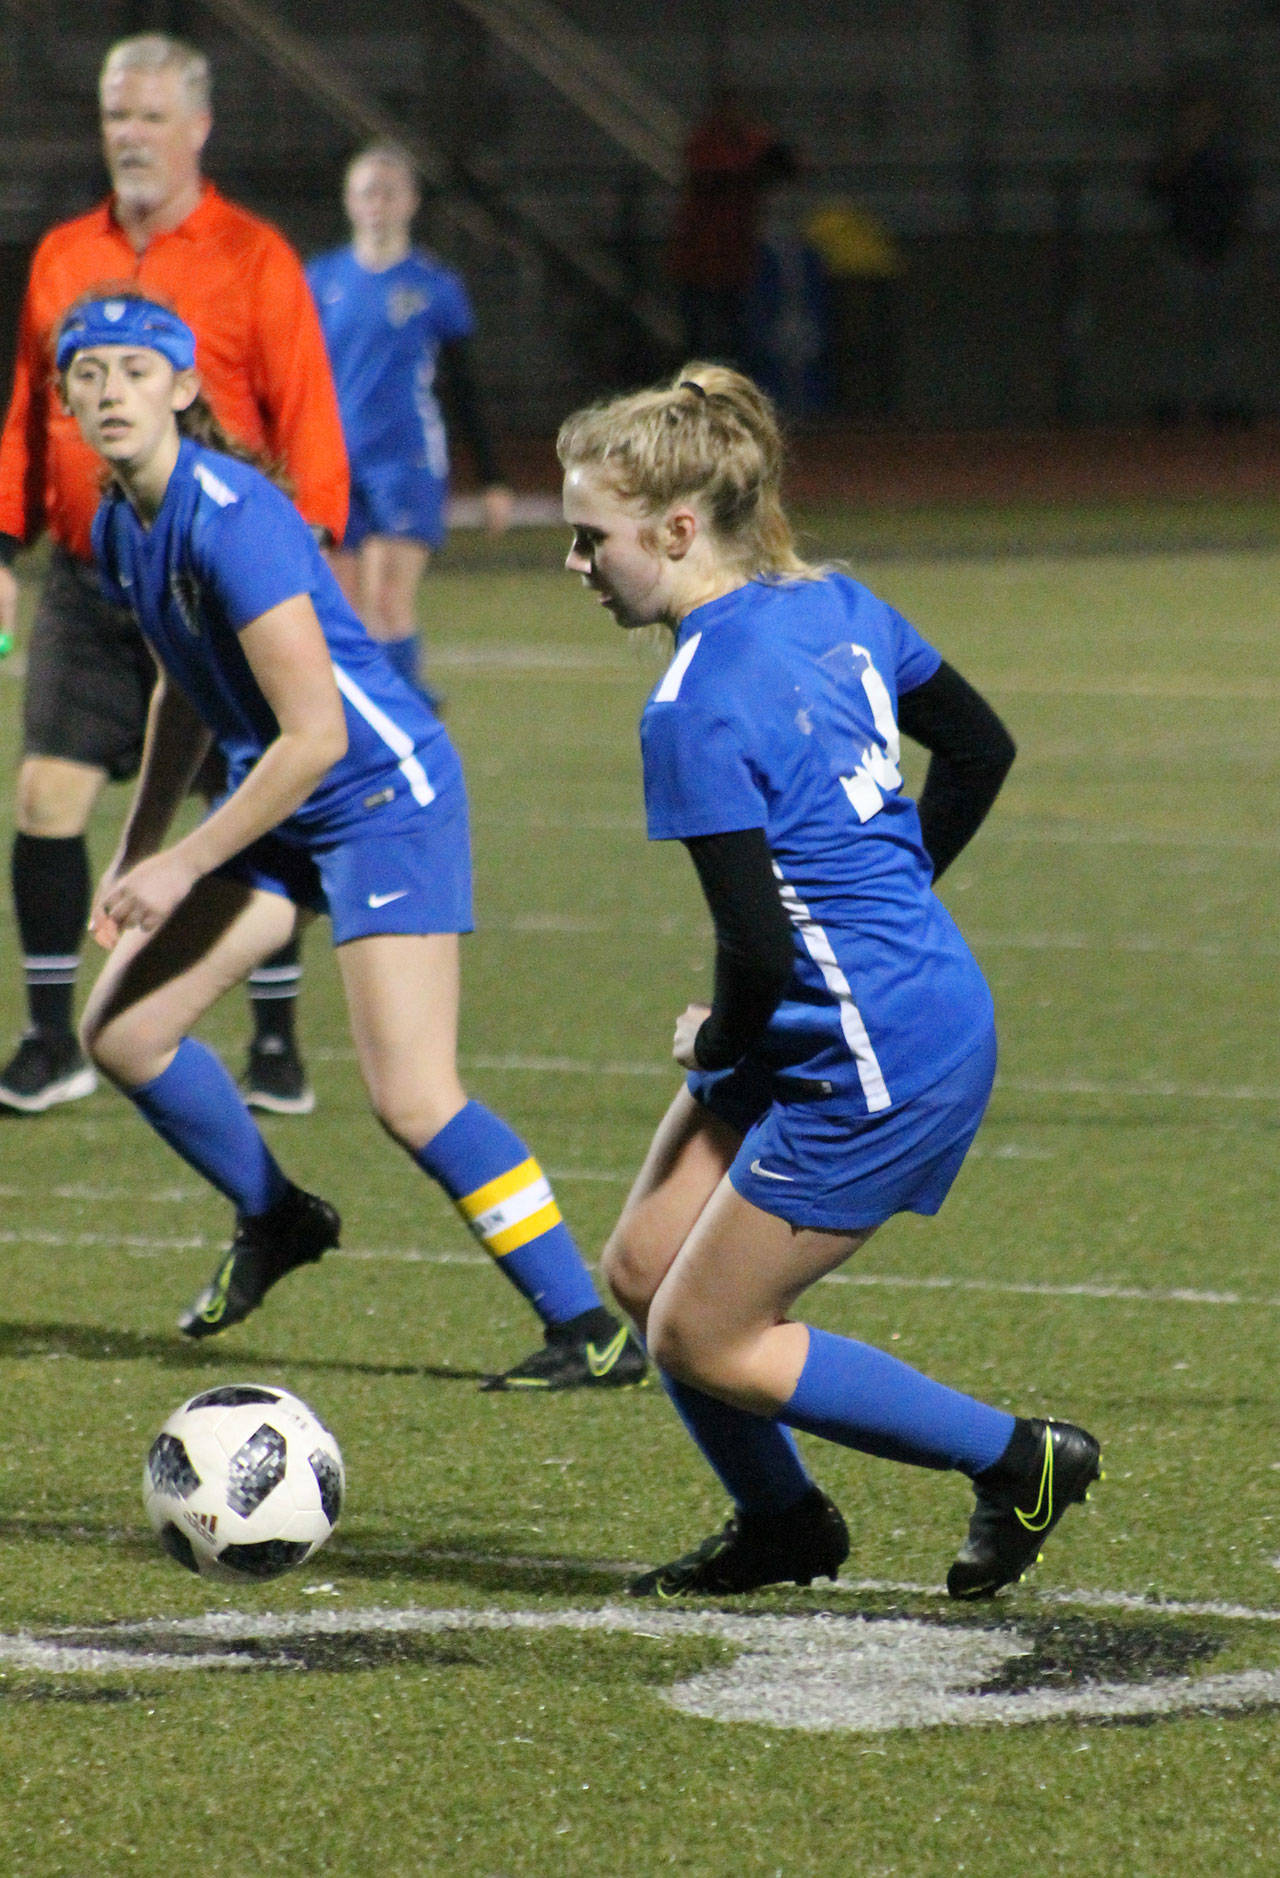 Mikenna Wicher sets up the final South Whidbey goal. Moments later she drilled her second goal of the night in the Falcons’ 4-0 win.(Photo by Jim Waller/South Whidbey Record)